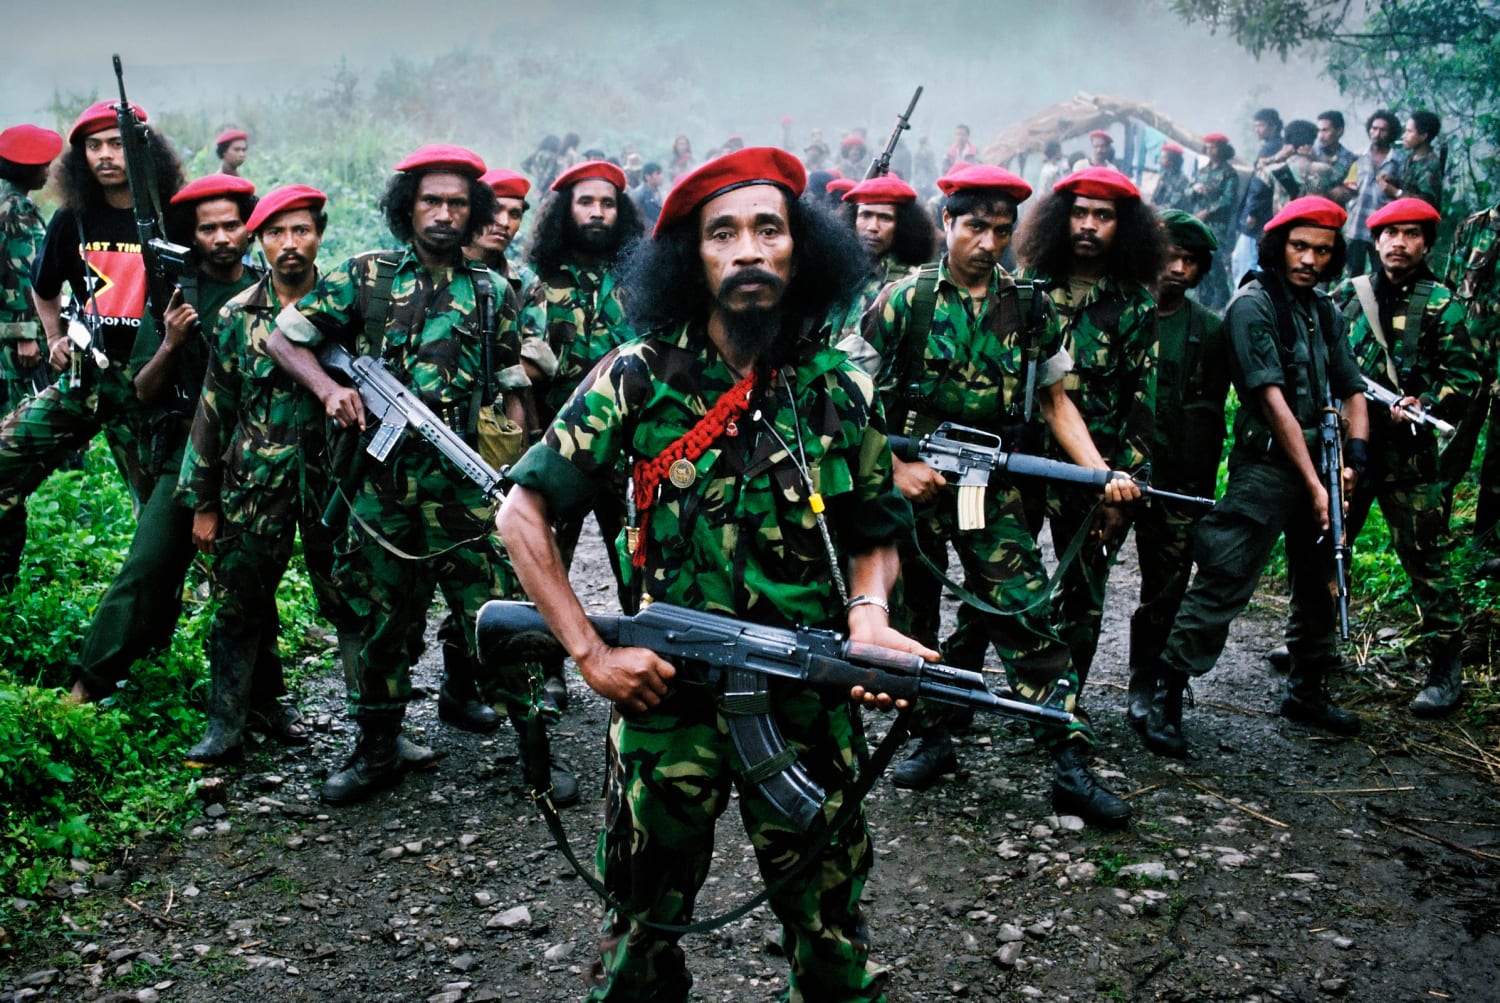 Falintil Guerrillas, East Timor, March 1999, photo by Vince Bevan